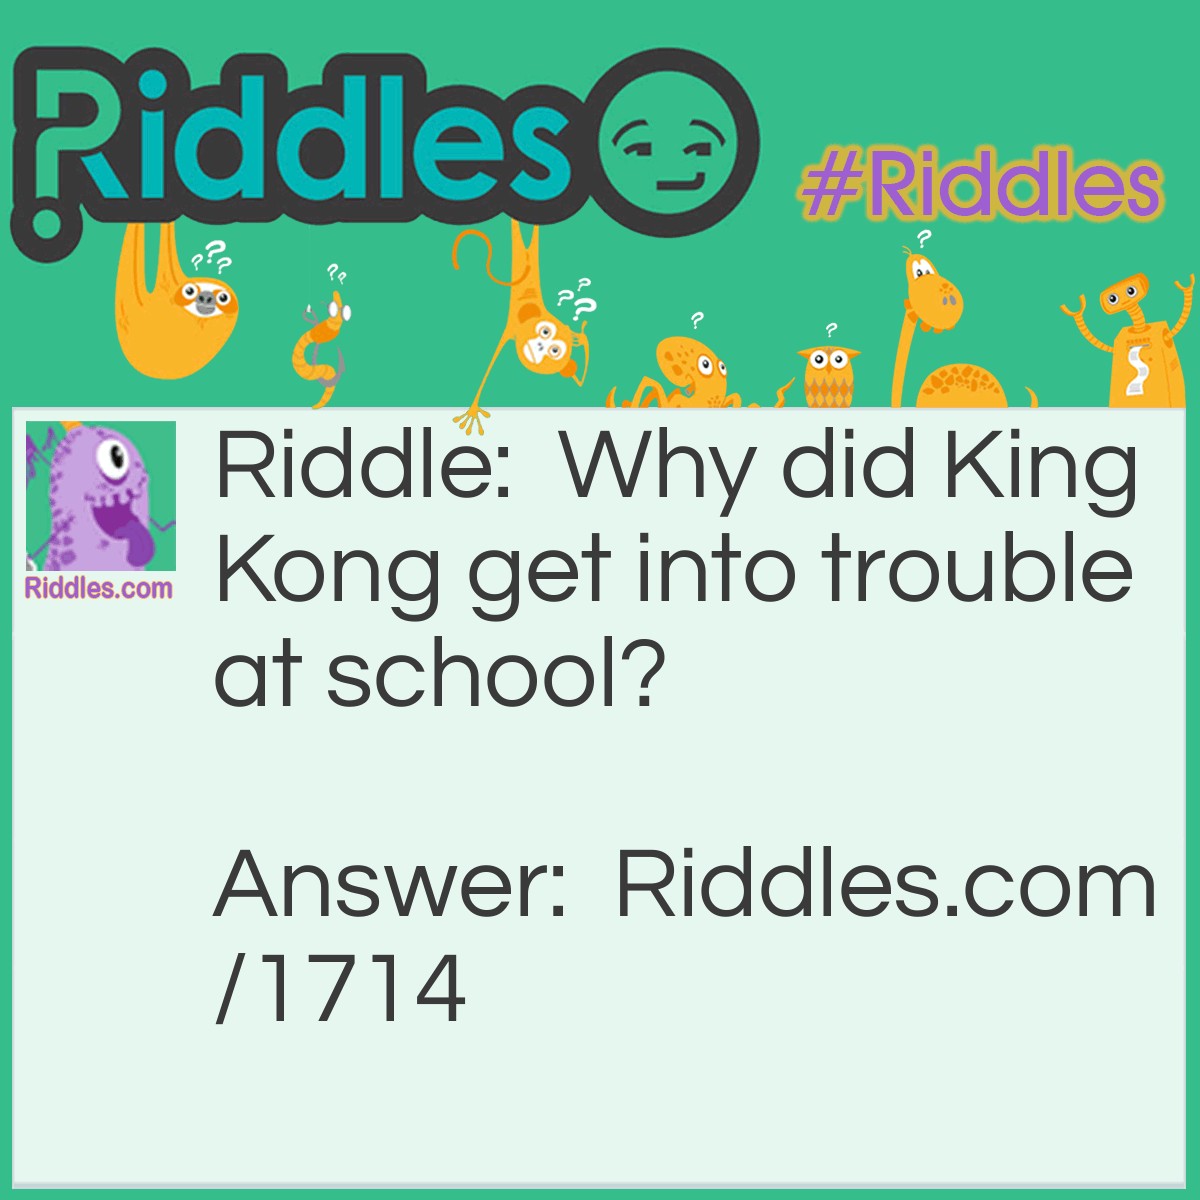 Riddle: Why did King Kong get into trouble at school? Answer: He was always monkeying around in class.